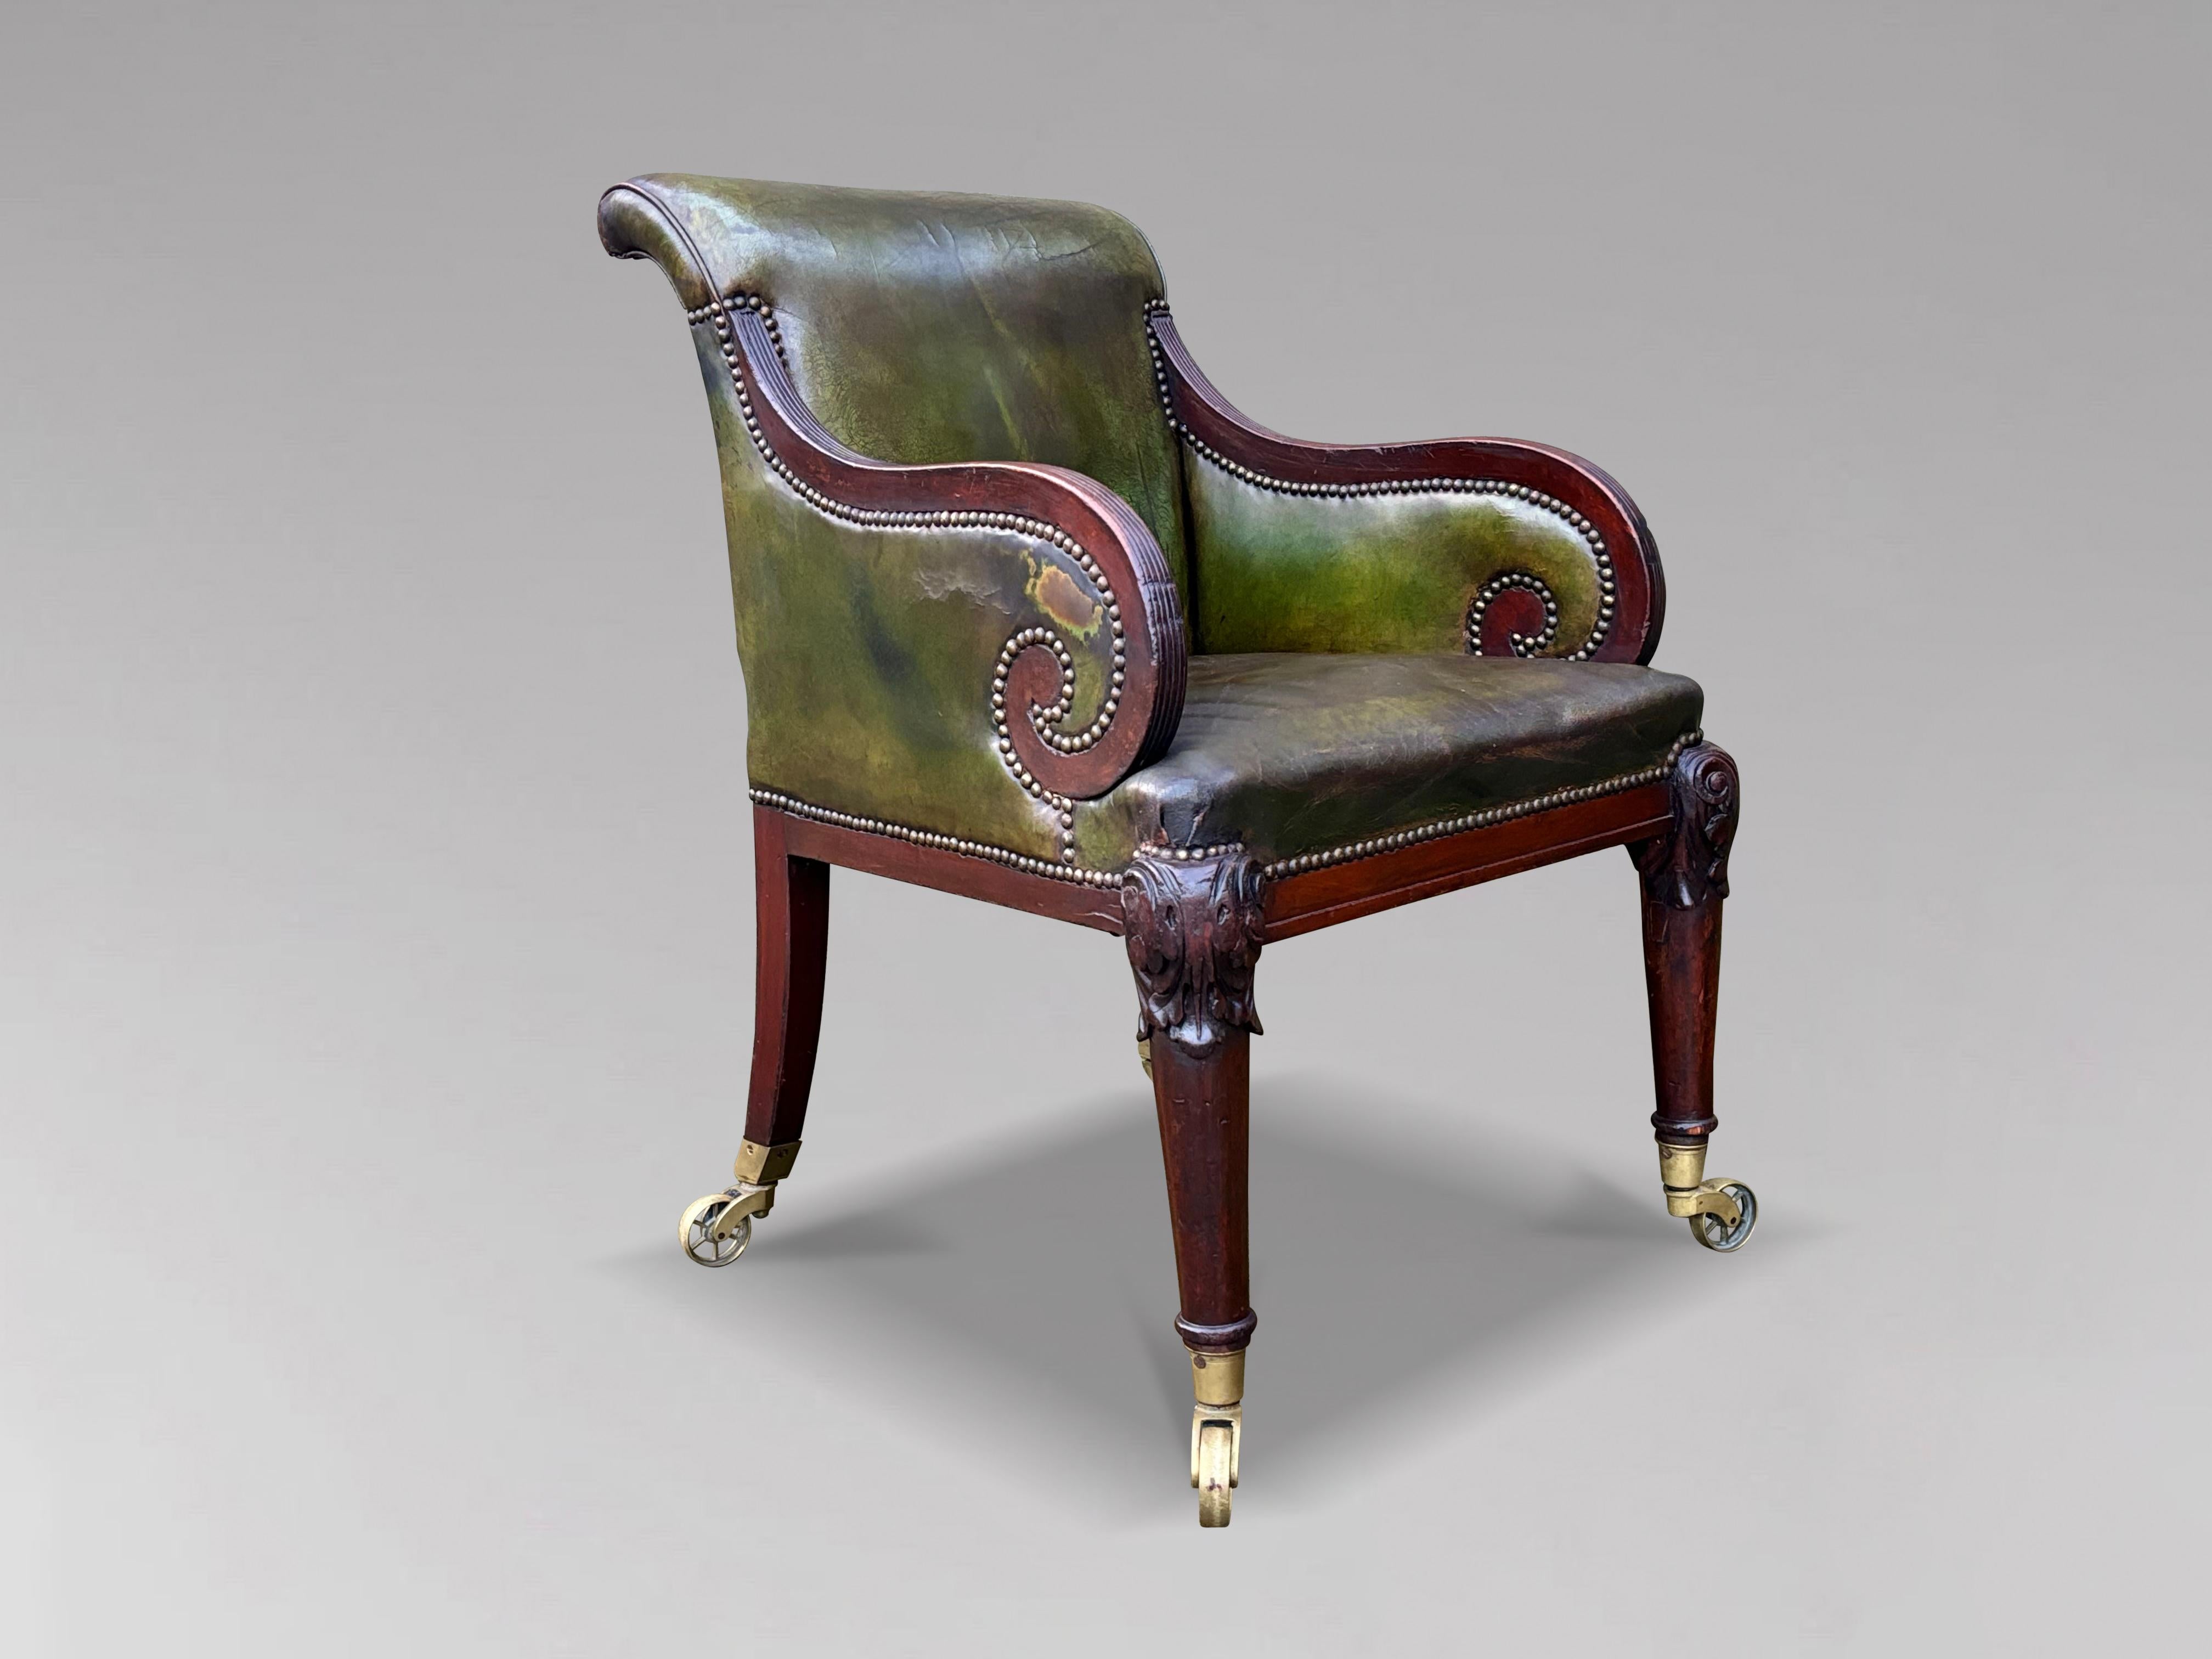 A stunning 19th century William IV period carved mahogany library armchair with a nicely shaped back and arms. Having lovely aged green leather upholstery and decorative brass studding, upholstered back, scrolled armrests with a sprung seat raised